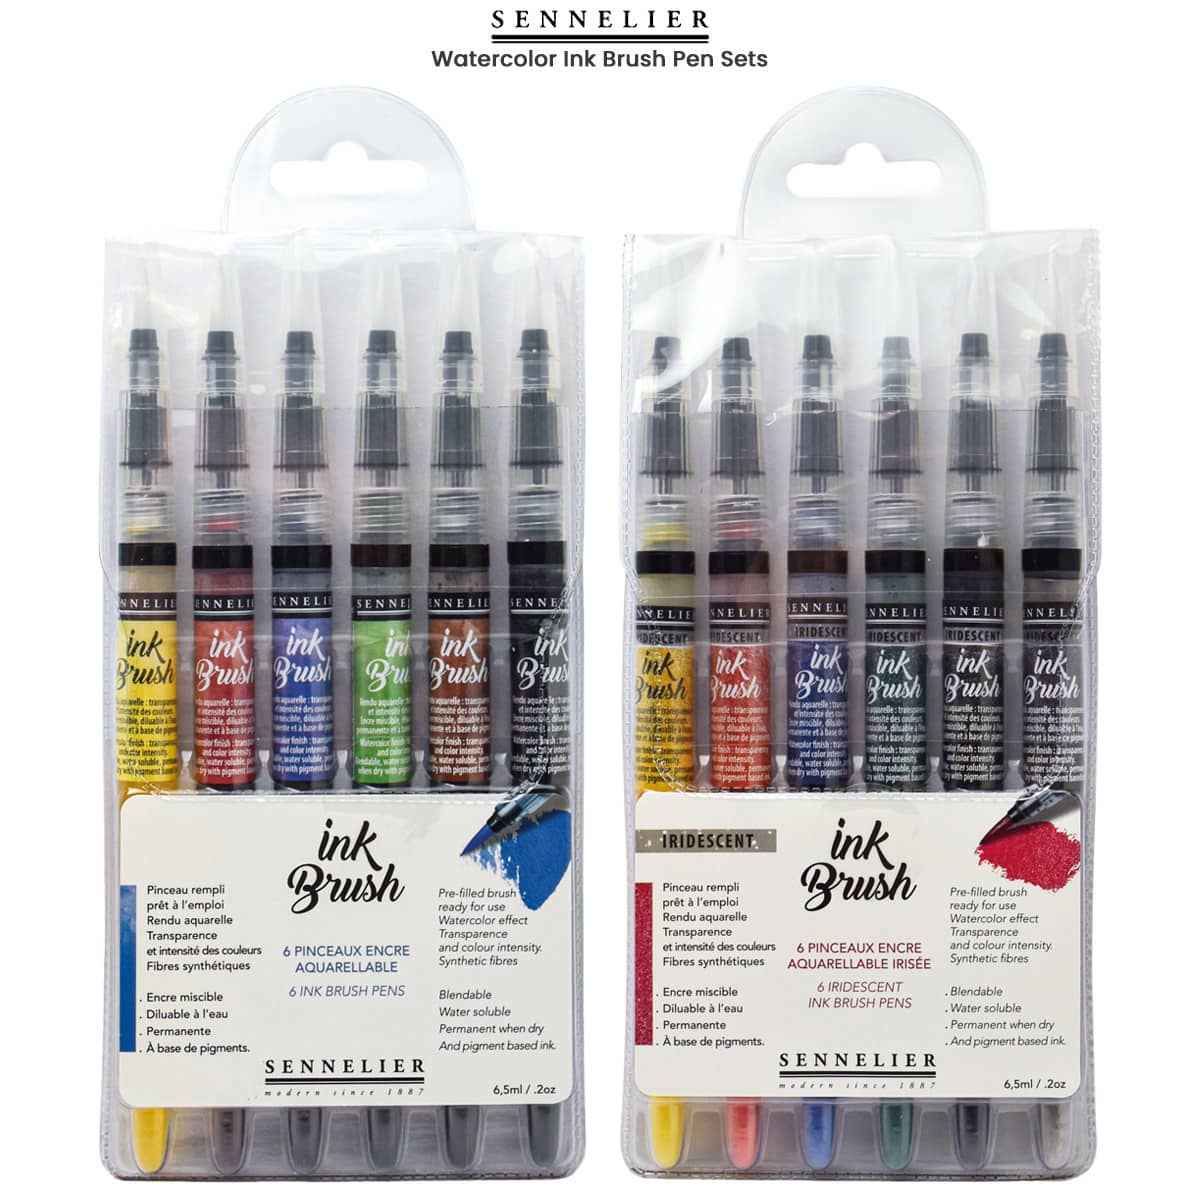  FW Mixed Media Paint Marker Nibs - 8 Replacement Pen Nibs Size  0.8 mm Technical Tip Paint Markers - Refillable Paint Pen Nibs for Use with  Acrylic Ink and Other Liquid Media